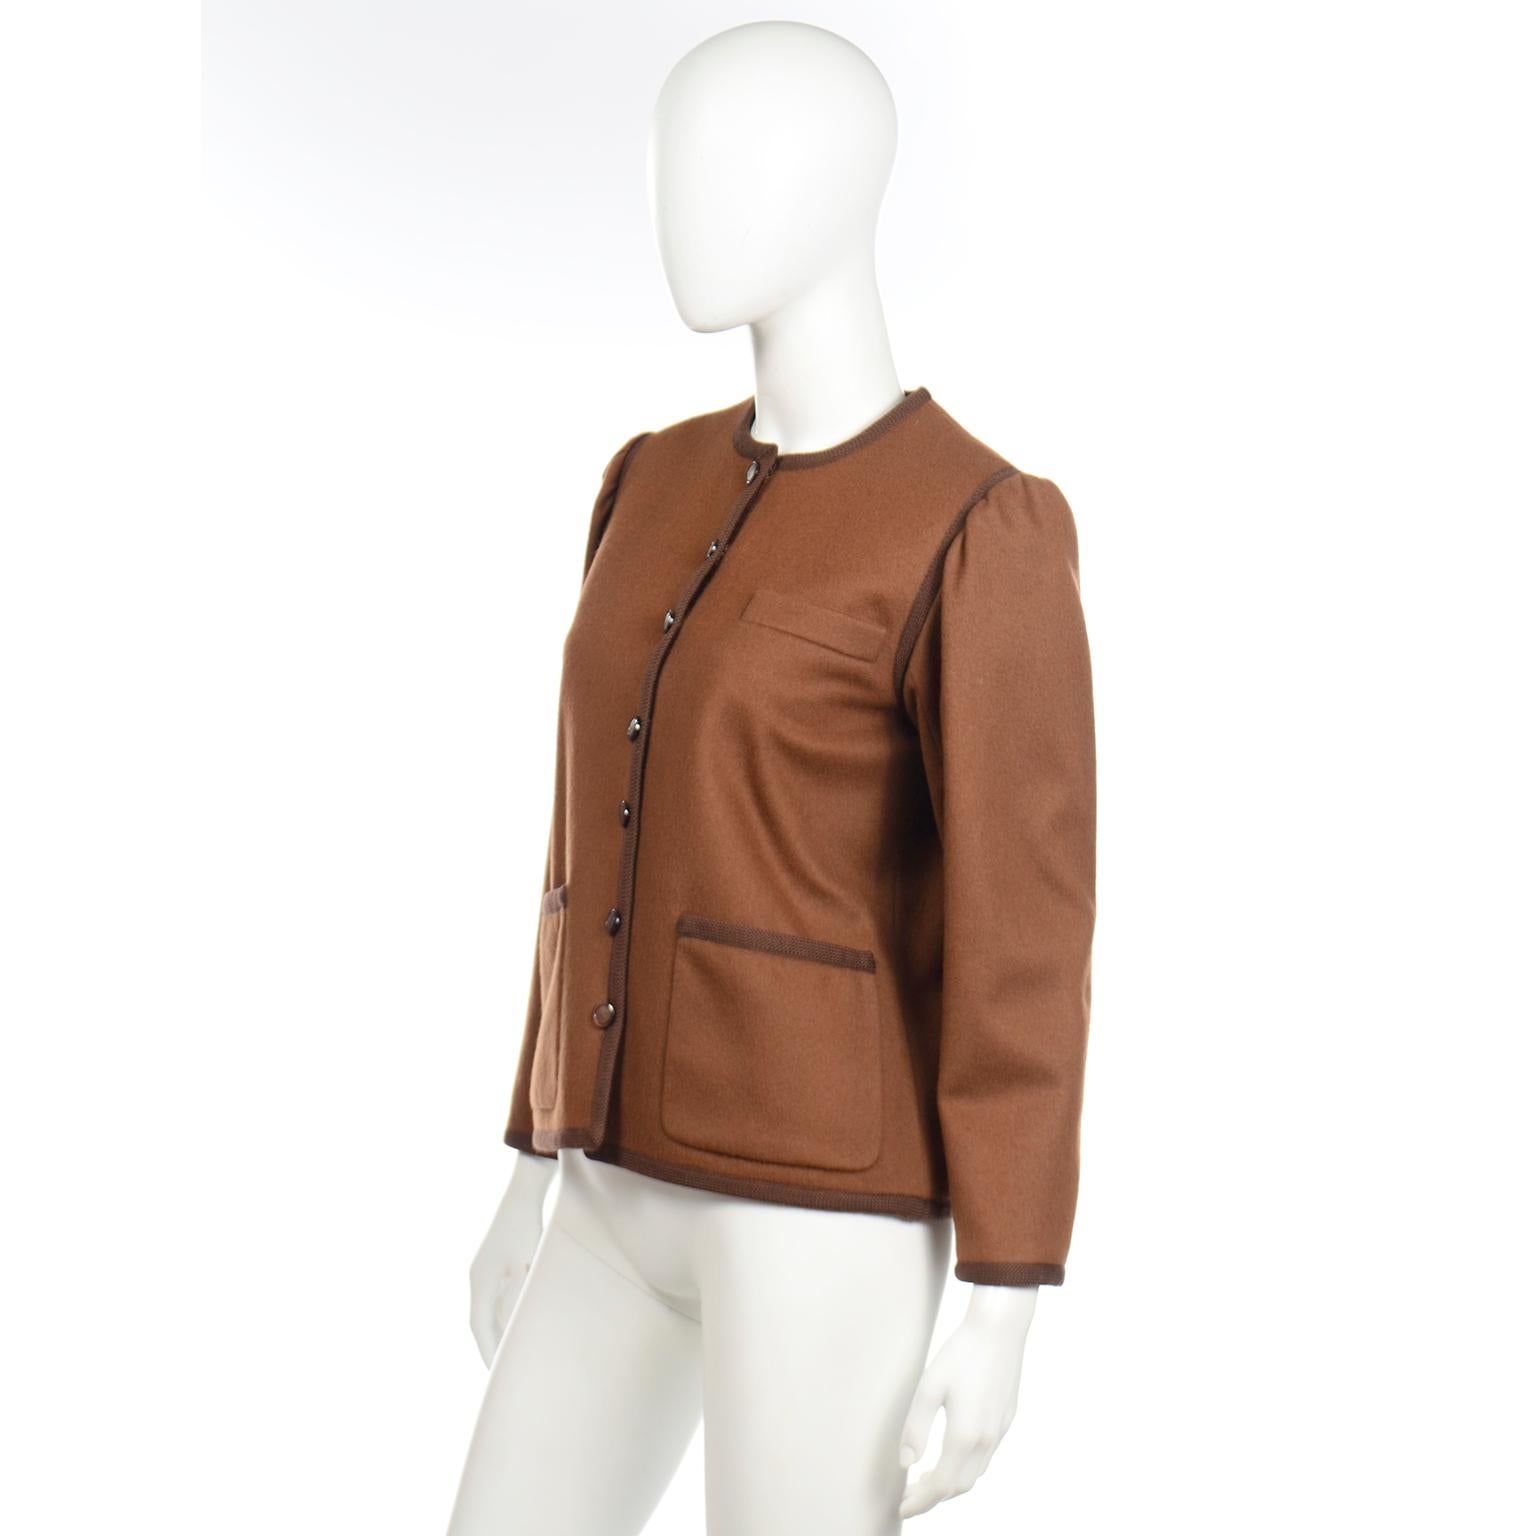 Yves Saint Laurent 1970s Ballet Russes Inspired Rive Gauche Brown Jacket In Excellent Condition For Sale In Portland, OR